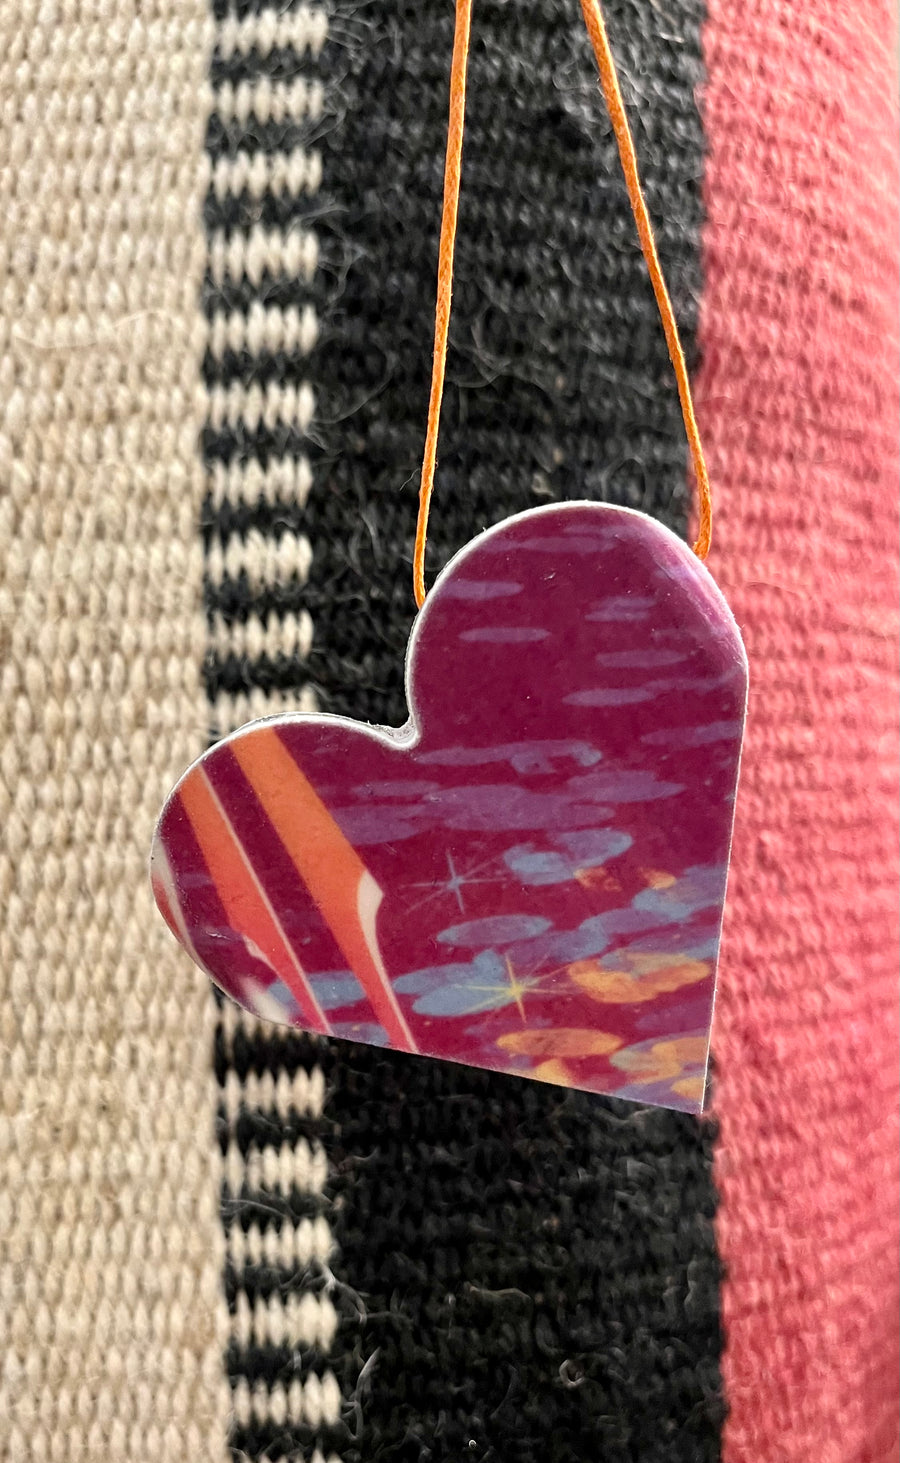 Upcycled Ski Heart - Multicolor Edition - 4 different ones